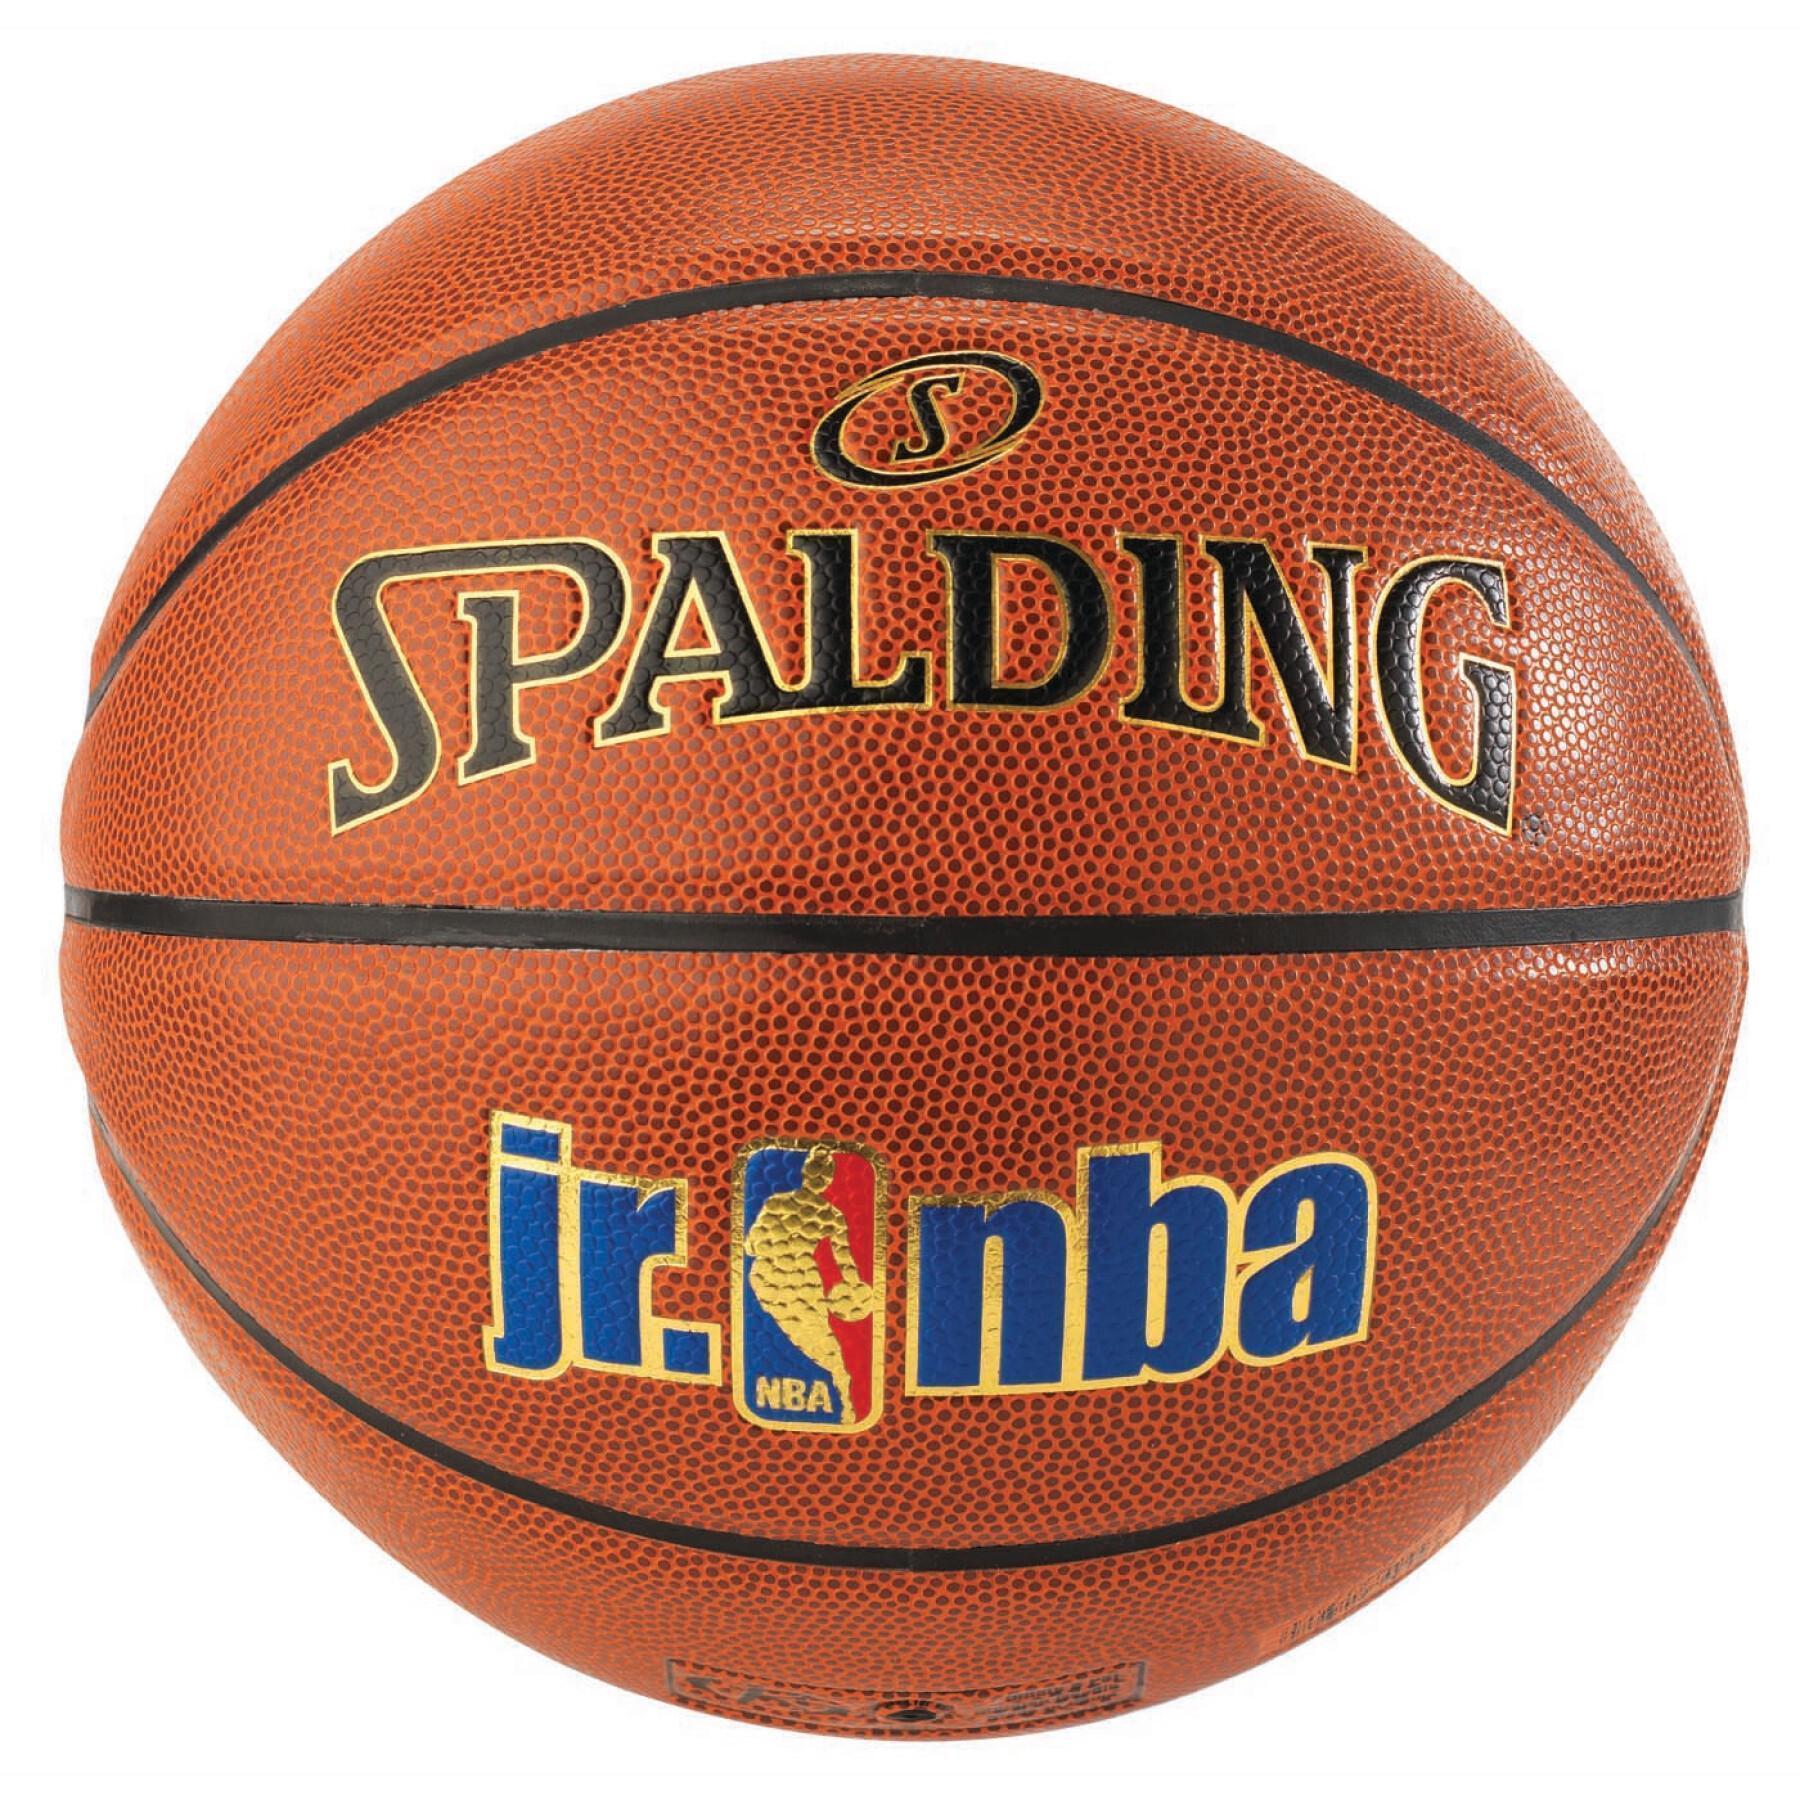 Palla per bambini Spalding NBA Rookie Gear In/Out